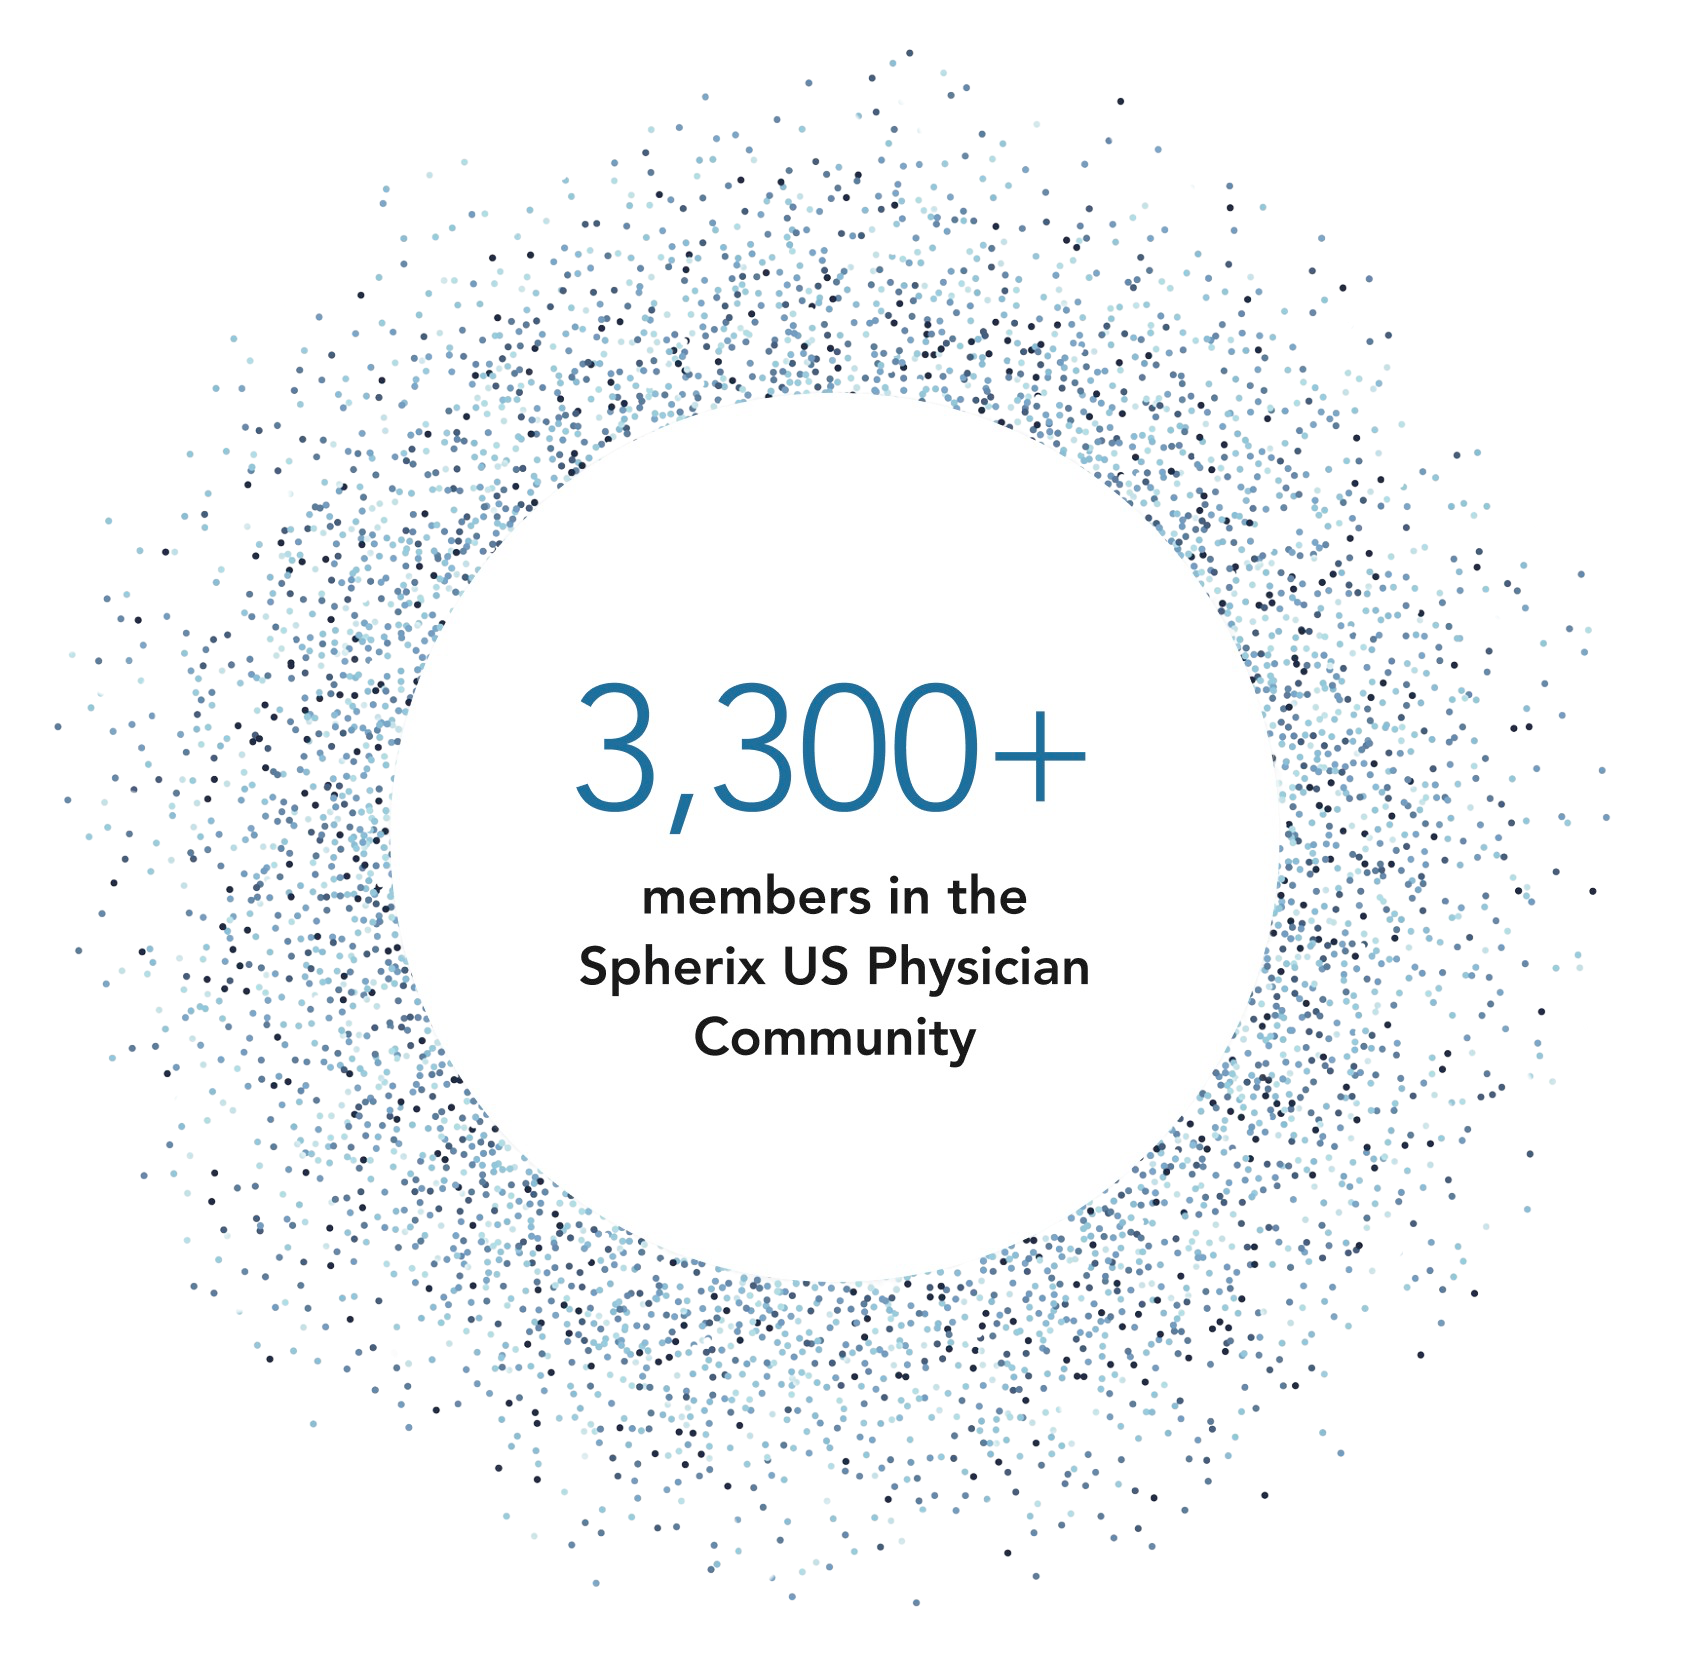 3,300+ members in the Spherix US Physician Community